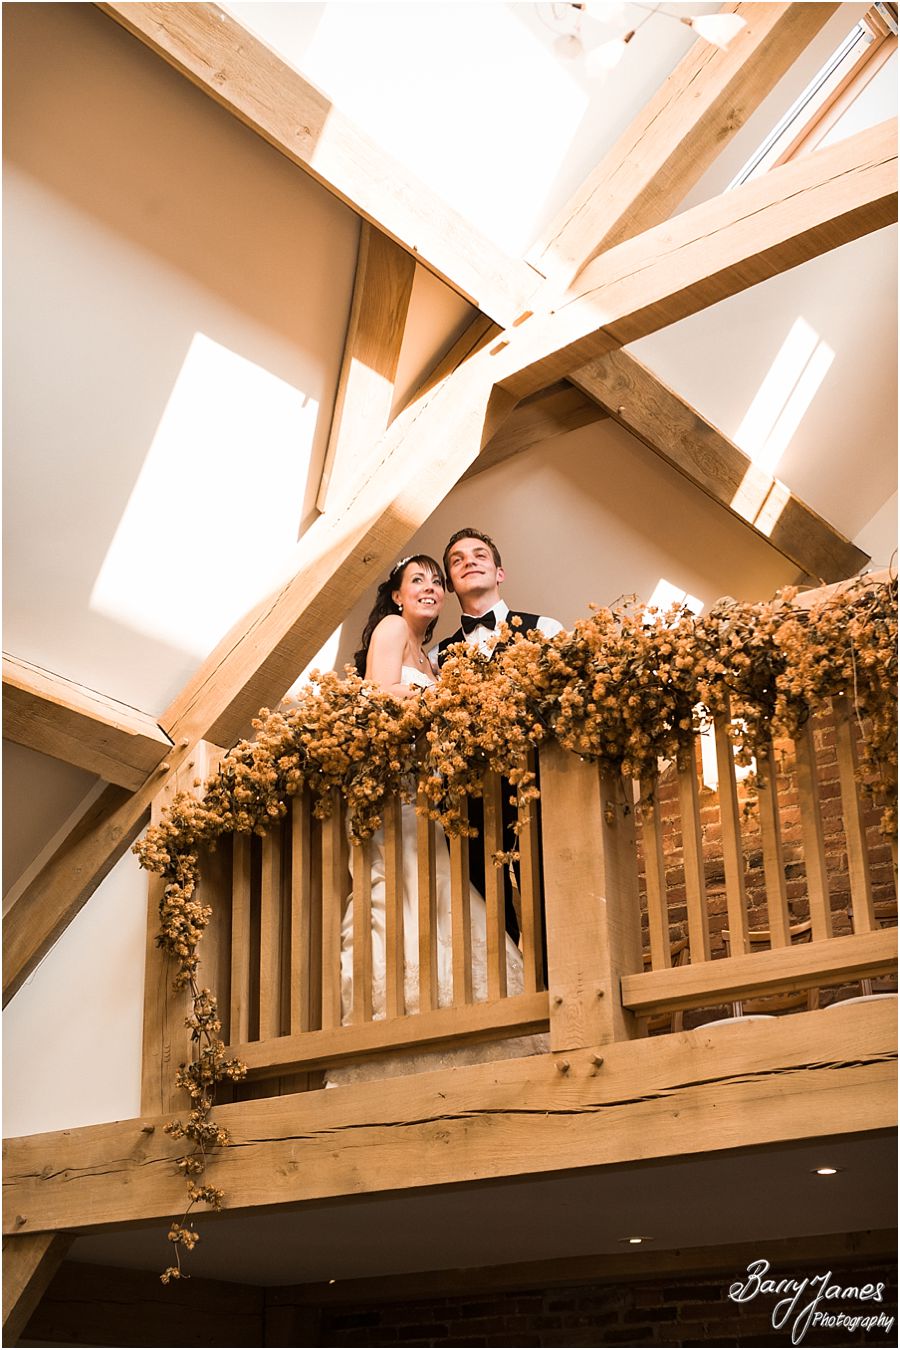 Recommended wedding photographers at Mythe Barn in Atherstone, Warwickshire by Warwickshire Wedding Photographer Barry James